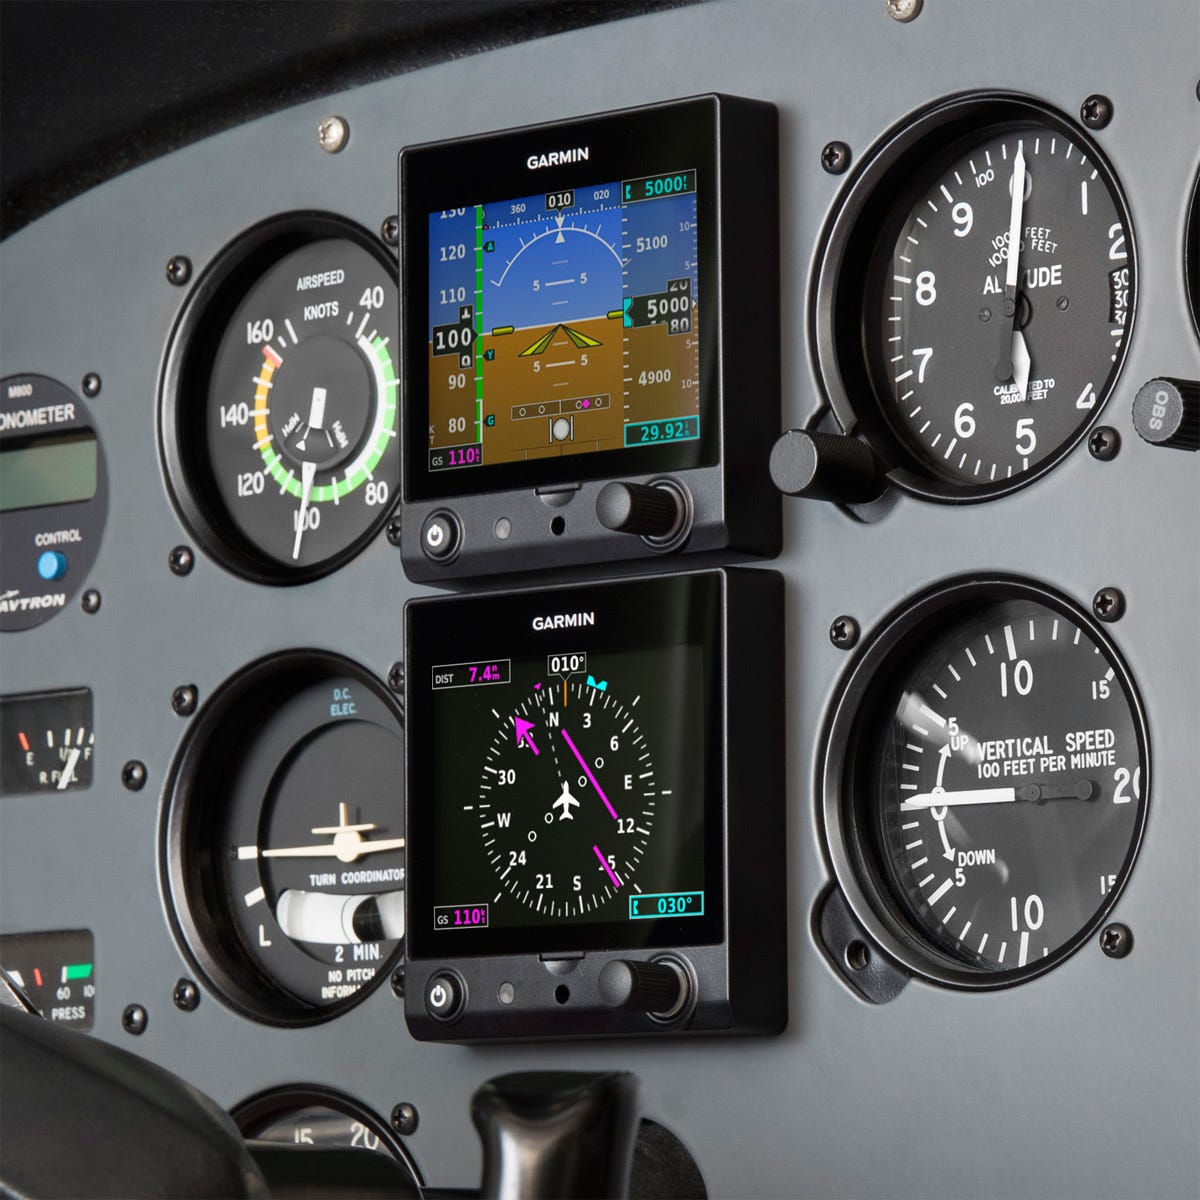 Garmin G5 DG/HSI (certificated airplanes) from Sporty's Pilot Shop